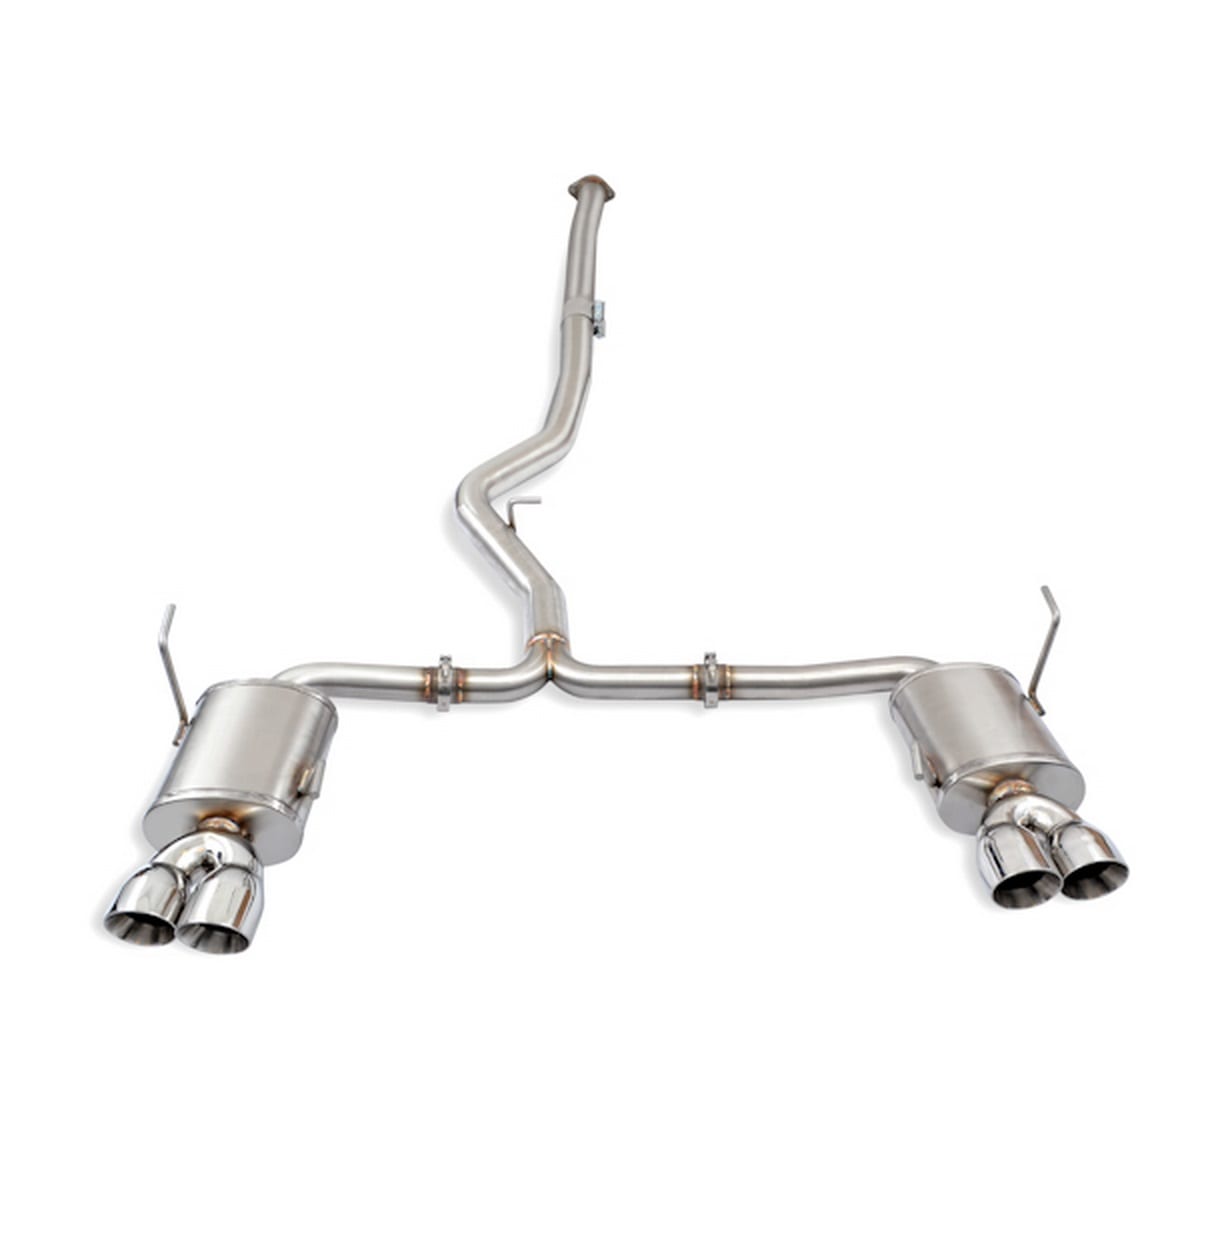 Mishimoto 2015-2016 Ford Mustang 2.3L EcoBoost Stainless Steel Cat-Back Exhaust